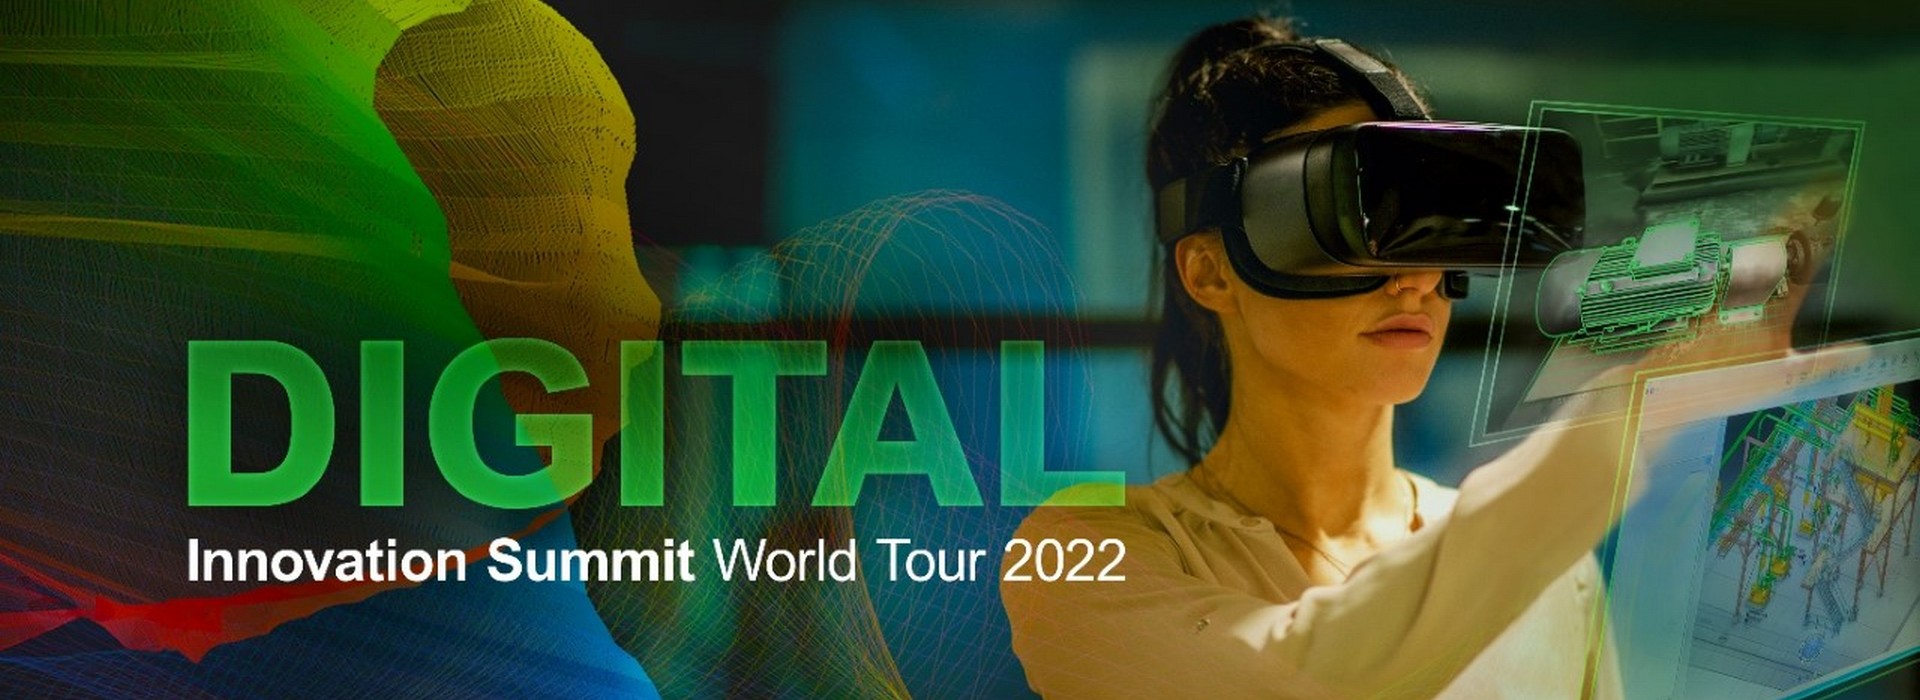 Schneider Electric Has Launched the Innovation Summit World Tour 2022